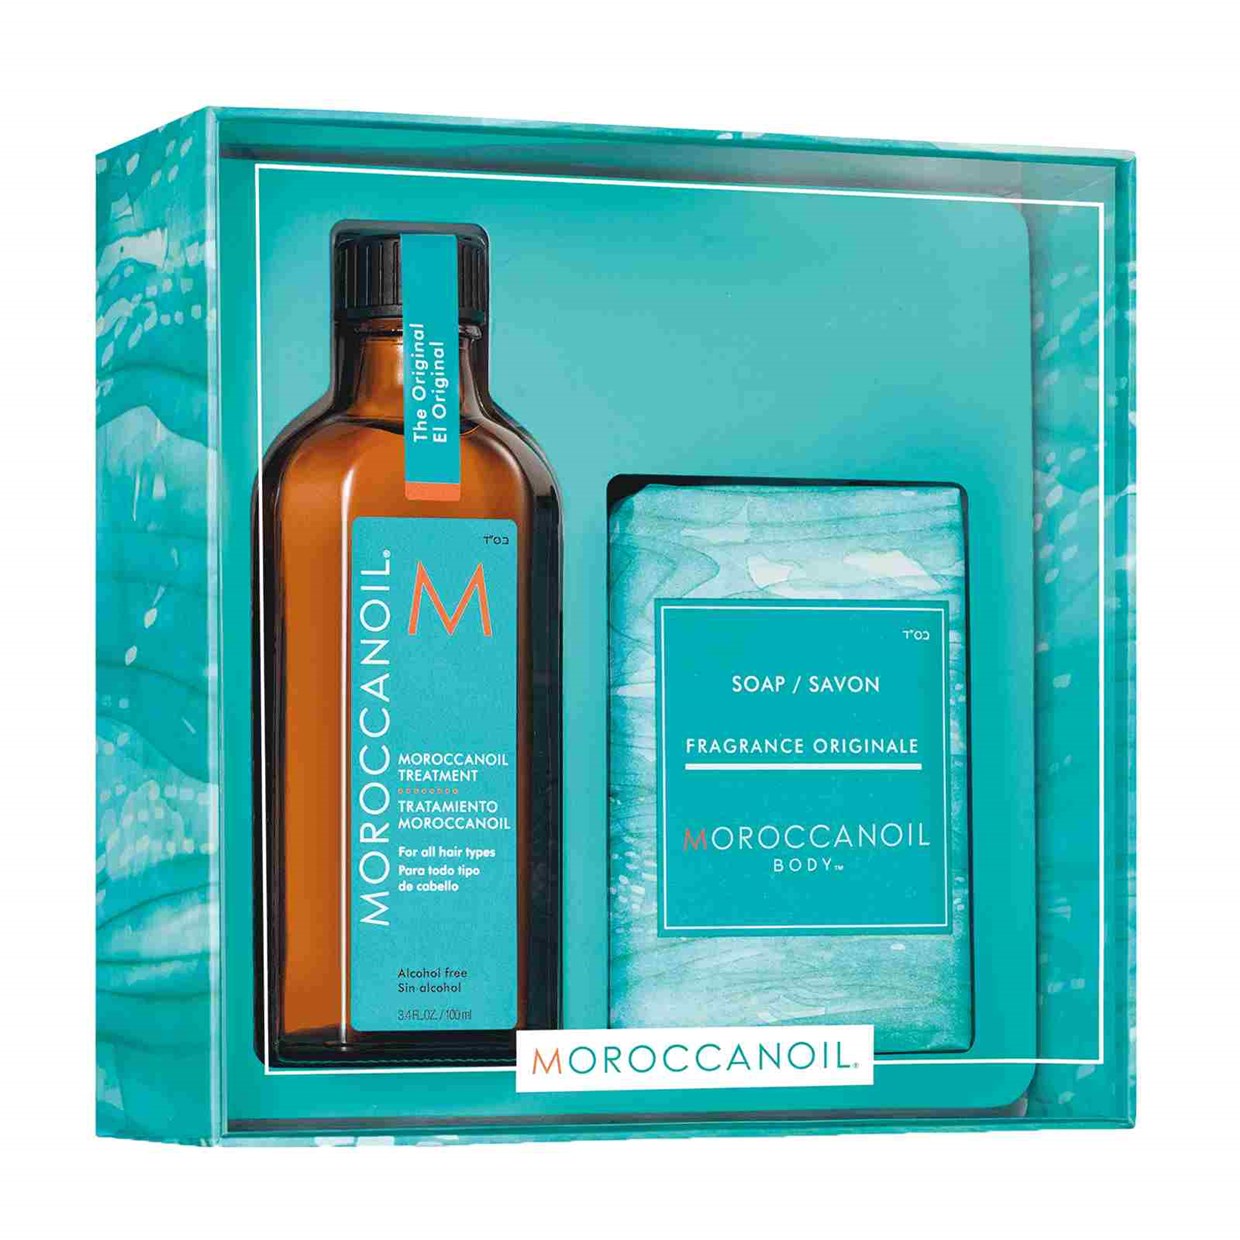 Moroccanoil Treatment Cleanse & Style Duo